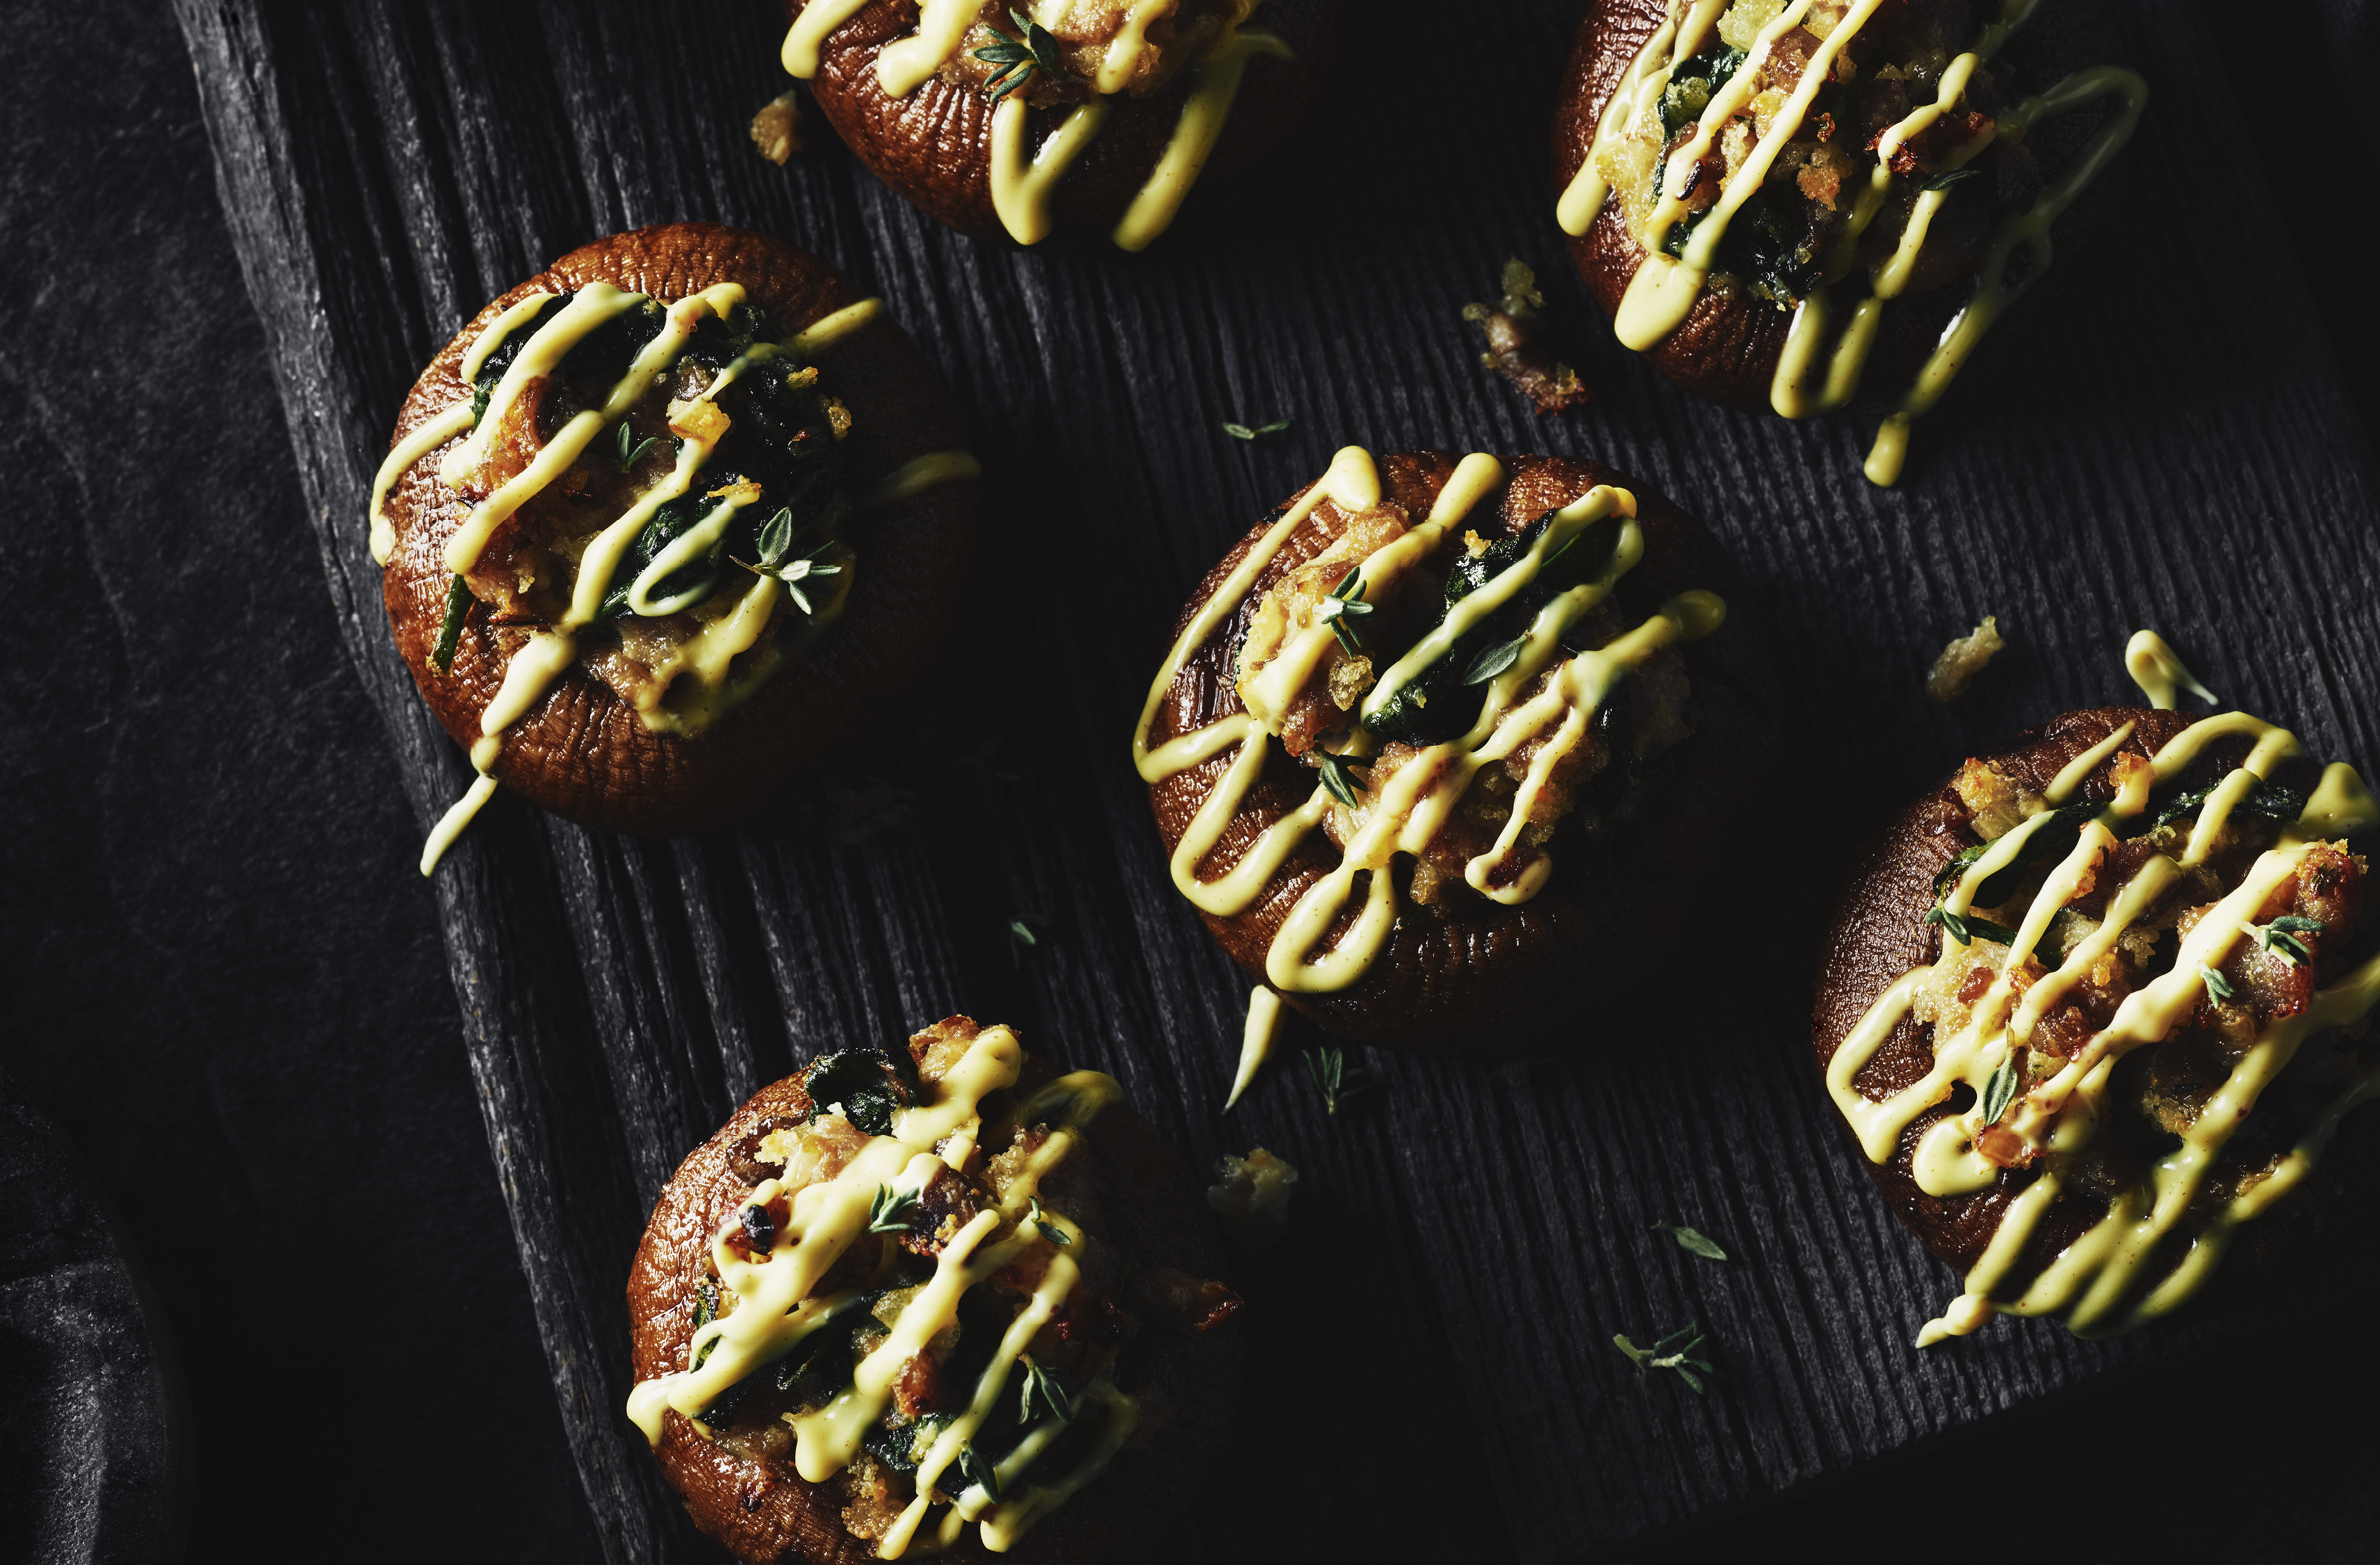 Sausage - stuffed mushroom caps drizzled with hollandaise sauce